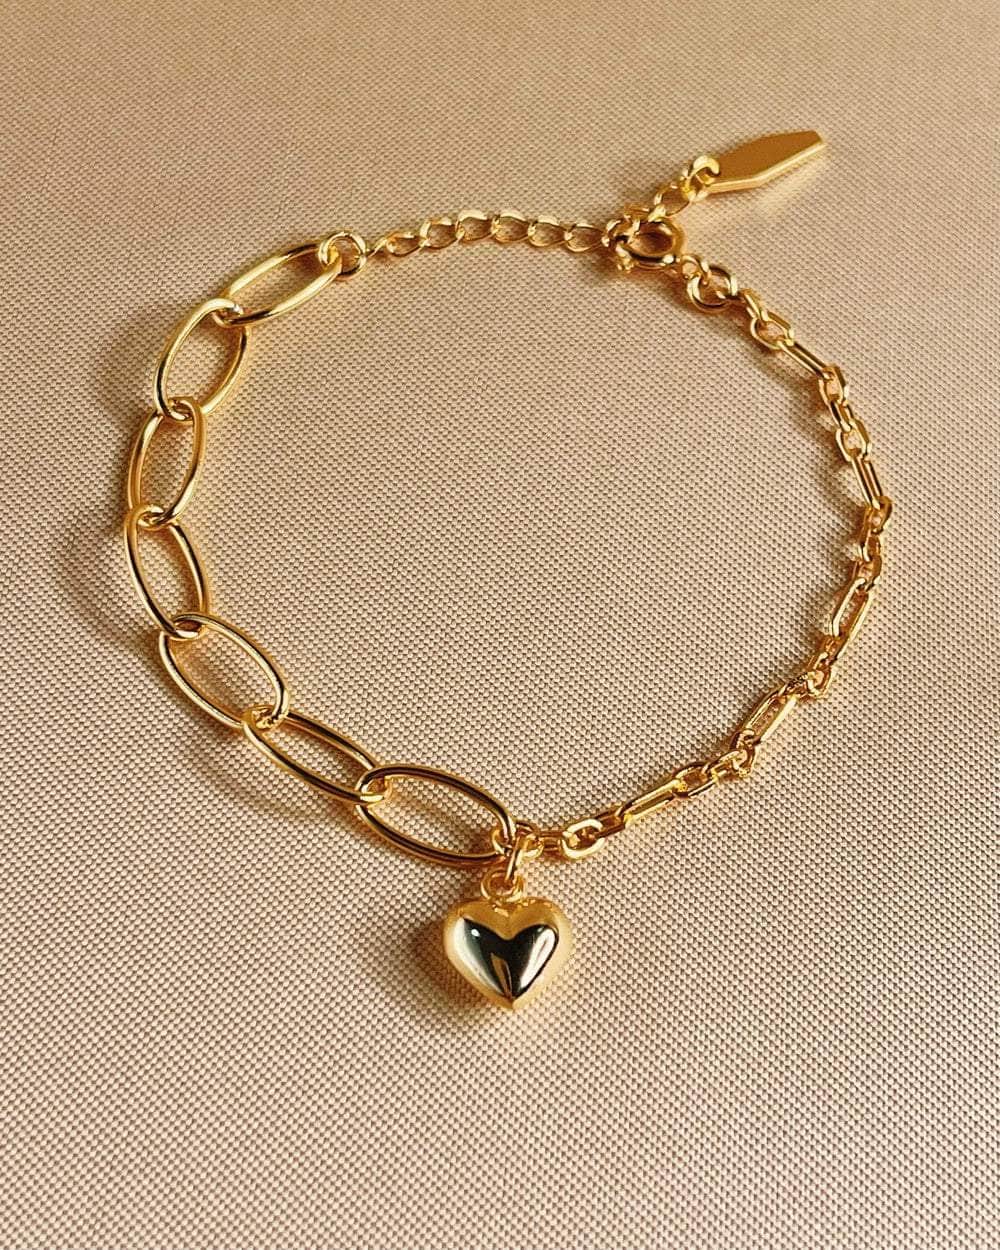 So Dainty Co. Bracelets Claire Gold Bracelet Gold Plated 925 Sterling Silver Jewelry